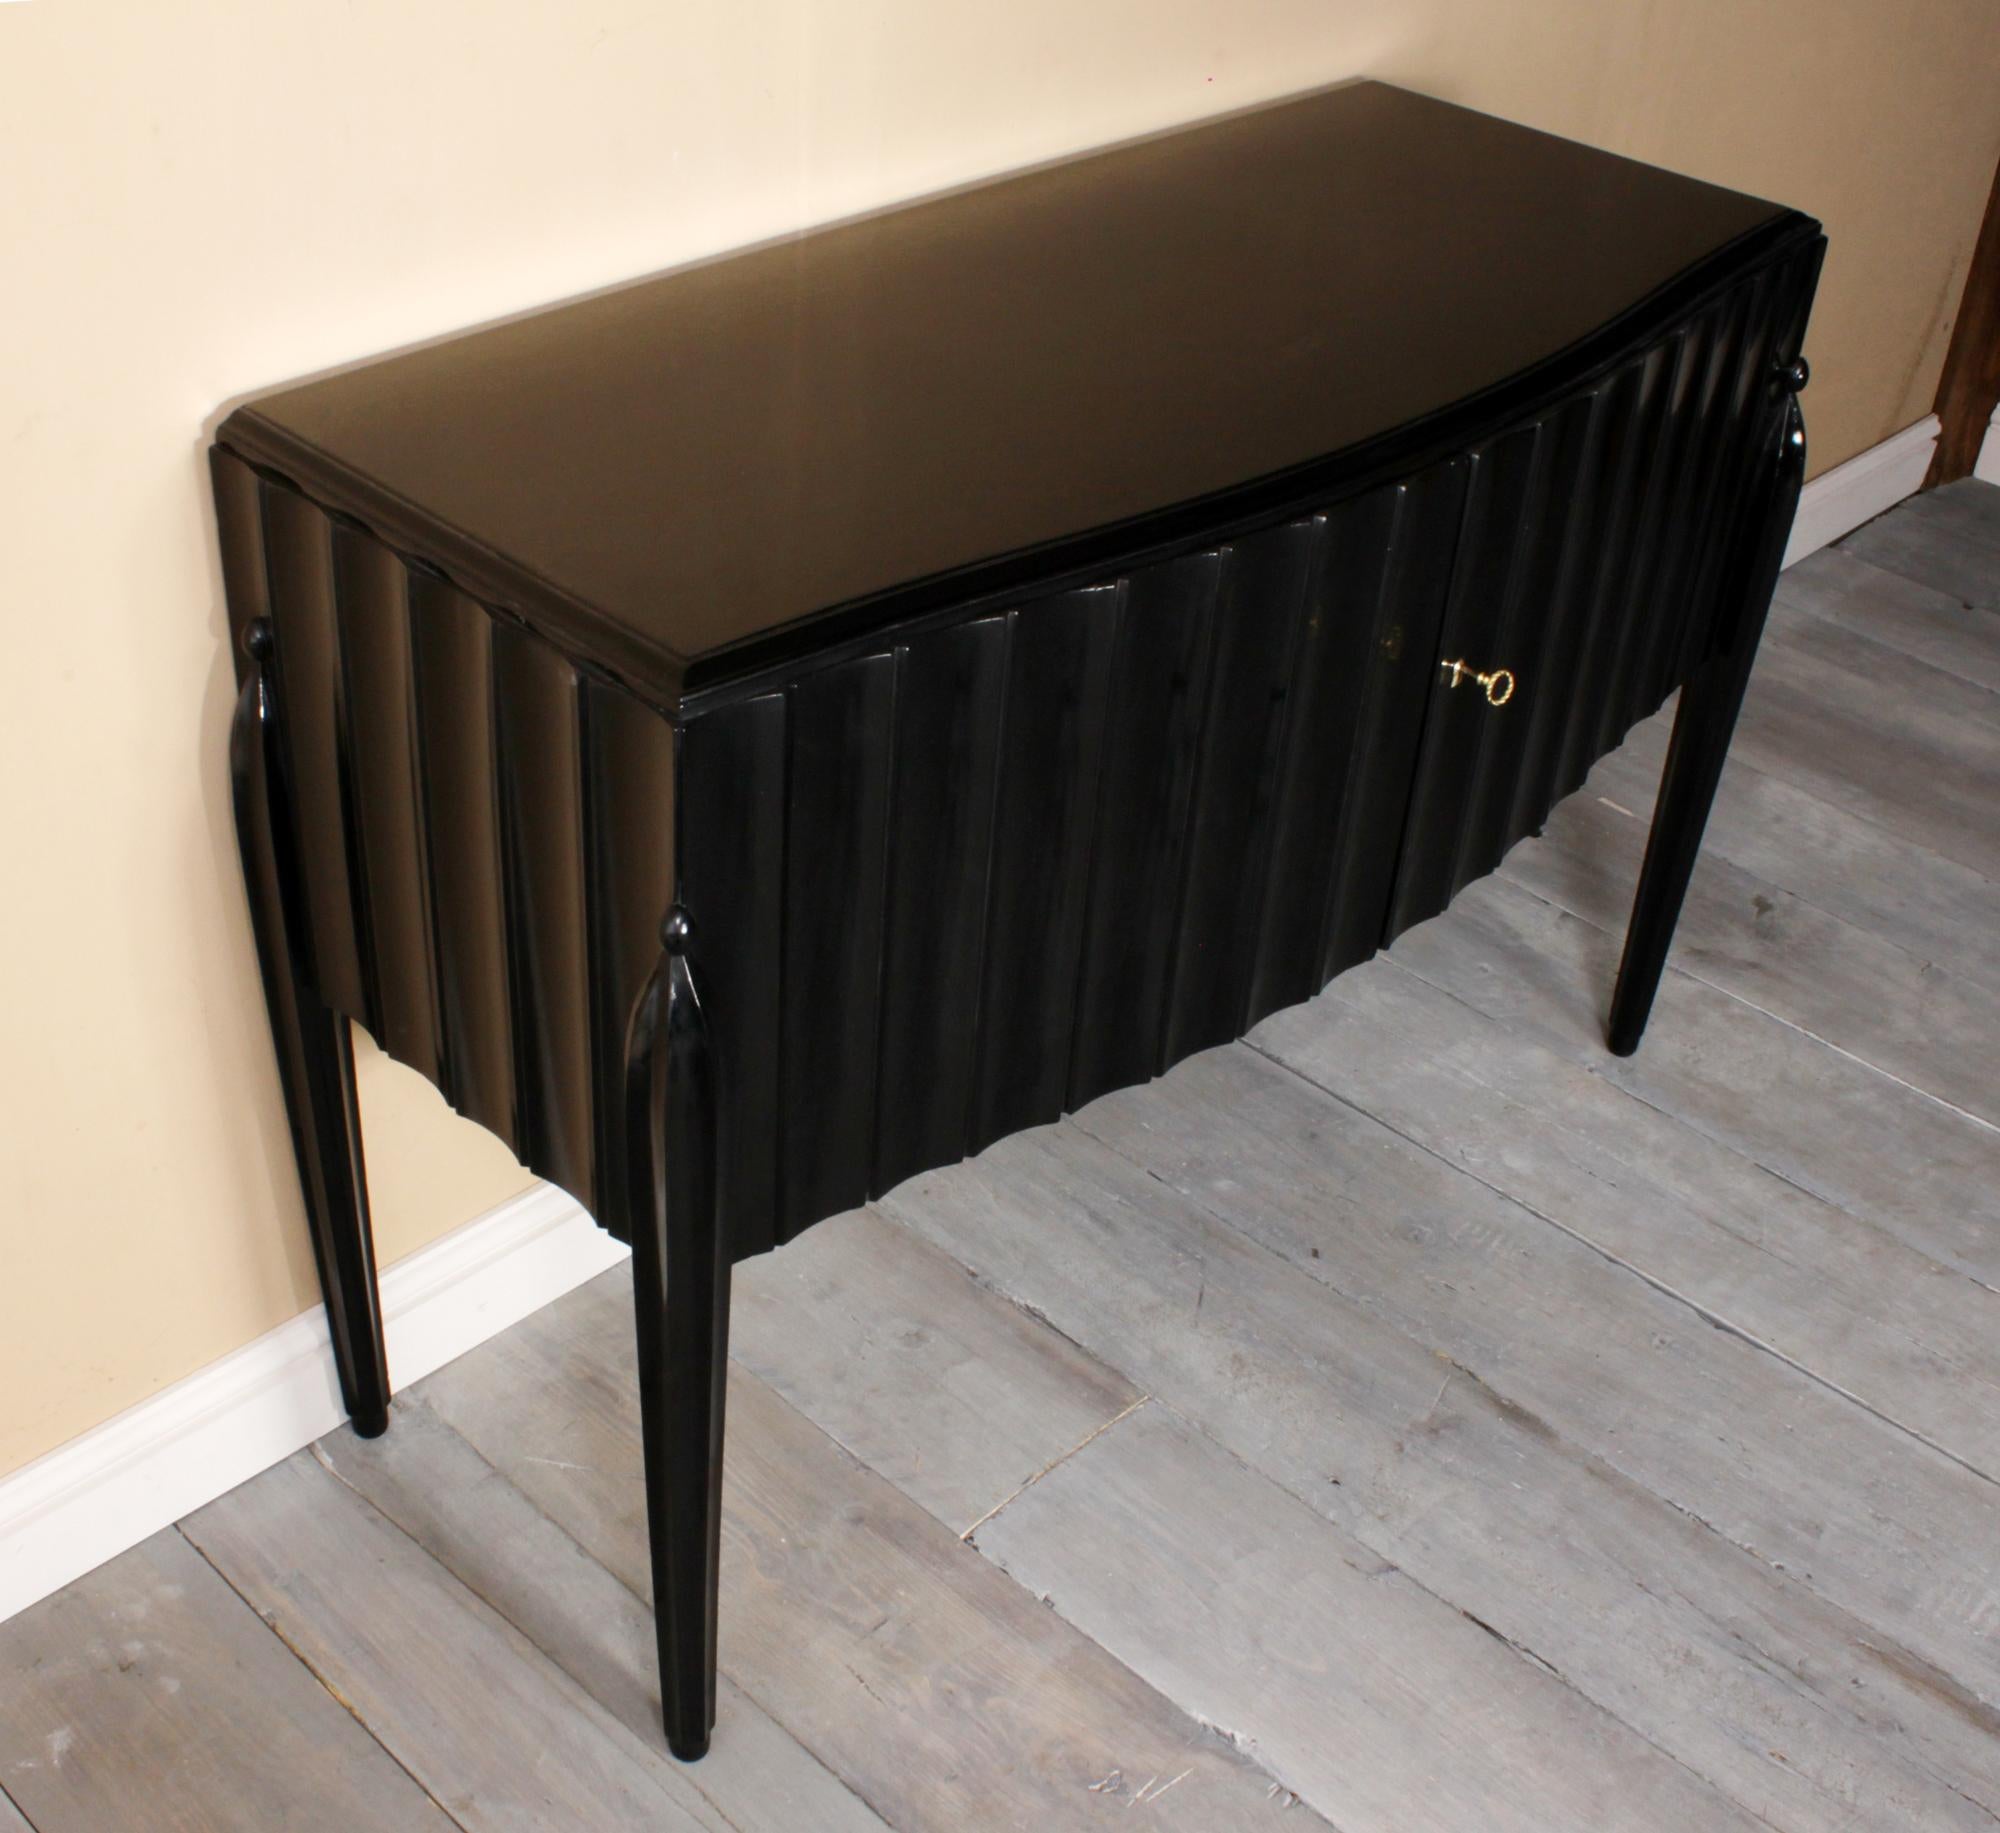 Italian fluted Art Deco sideboard in black piano lacquer, circa 1930.

A small Italian two door sideboard, fluted body on fluted legs, has the look of Jacques Emile Ruhlmann finished in ebonized piano lacquer with gloss shine, has been fully hand